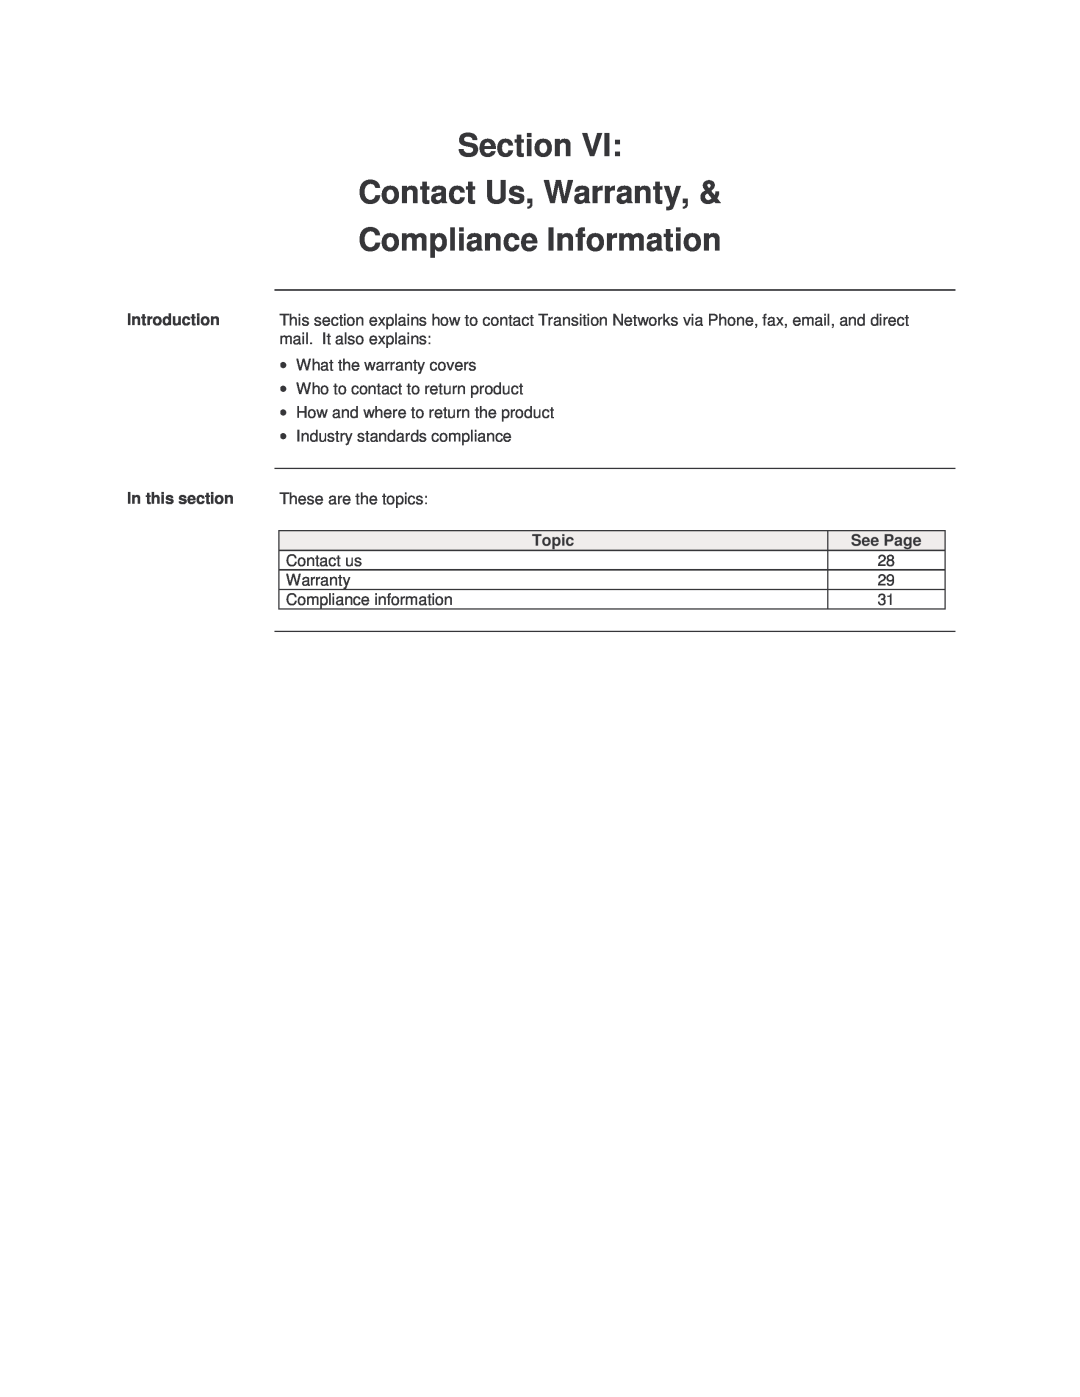 Transition Networks SISTF10xx-141-LR(T) installation manual Contact Us, Warranty, Compliance Information, Section 